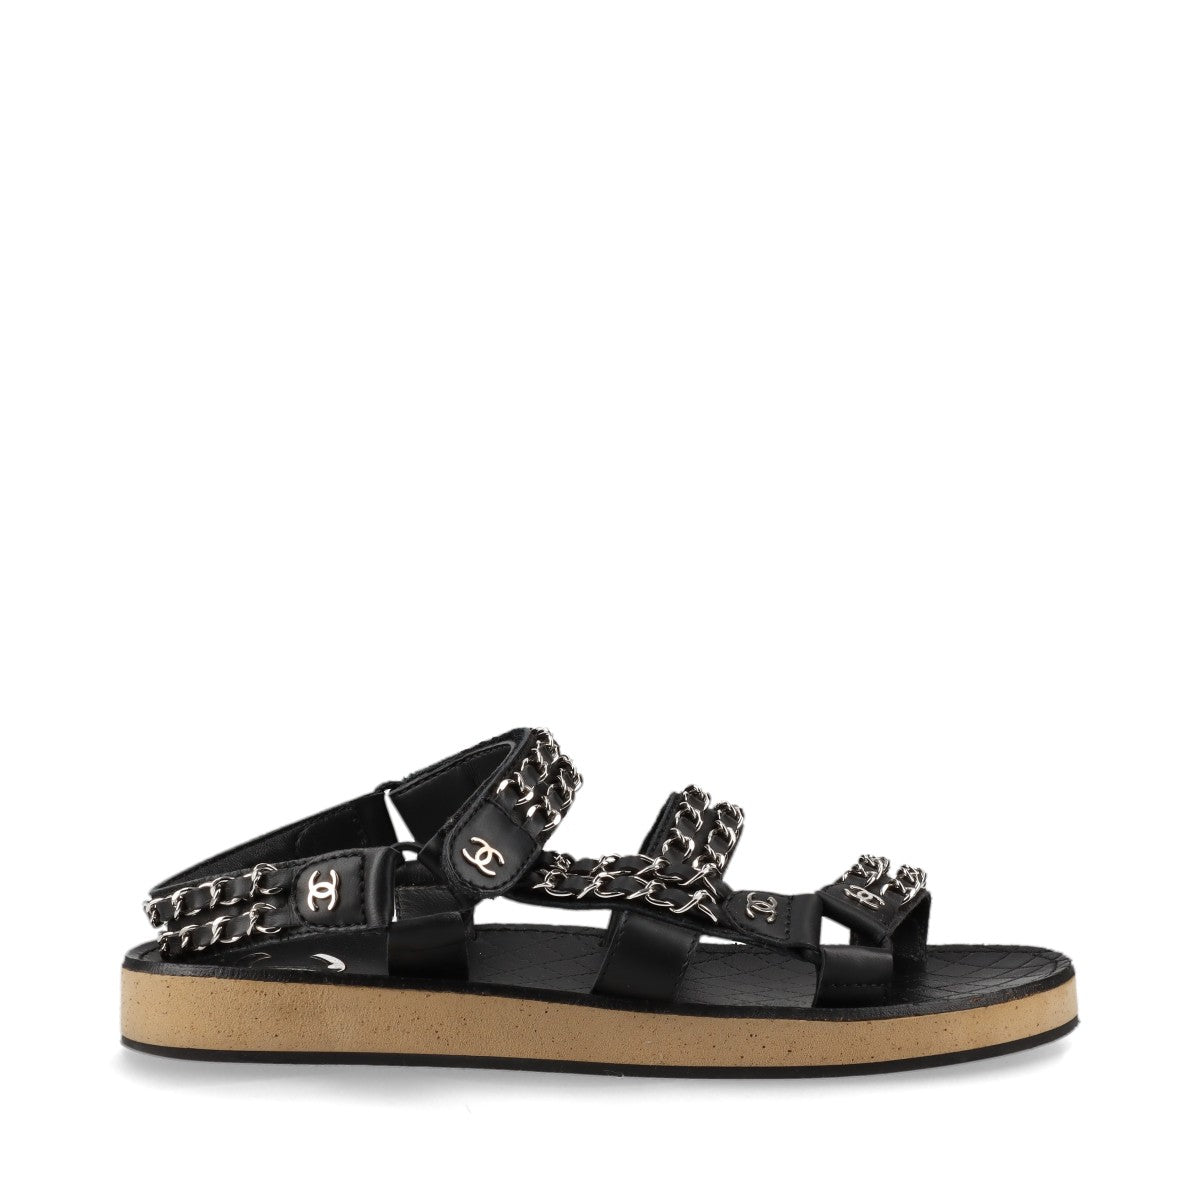 Chanel Coco Mark Matelasse 19P Leather Sandals EU37 Ladies' Black G33800 Chain box There is a bag